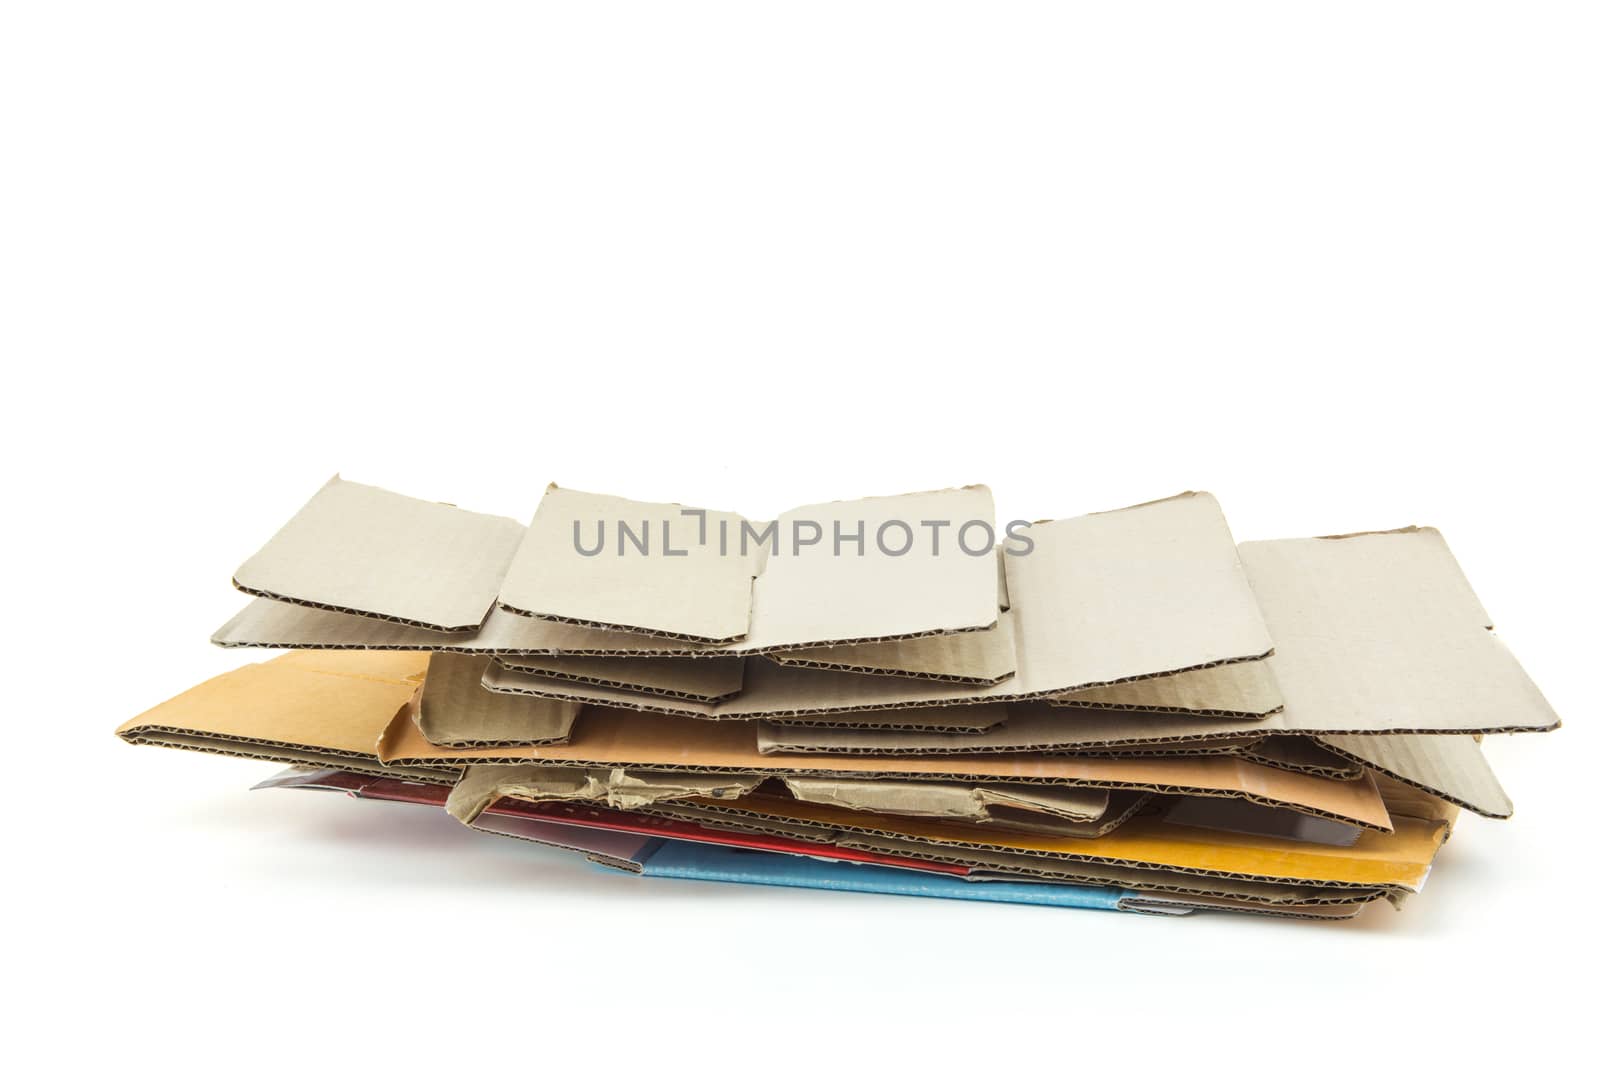 Big stack of cardboard isolated on white background - recycle concept.